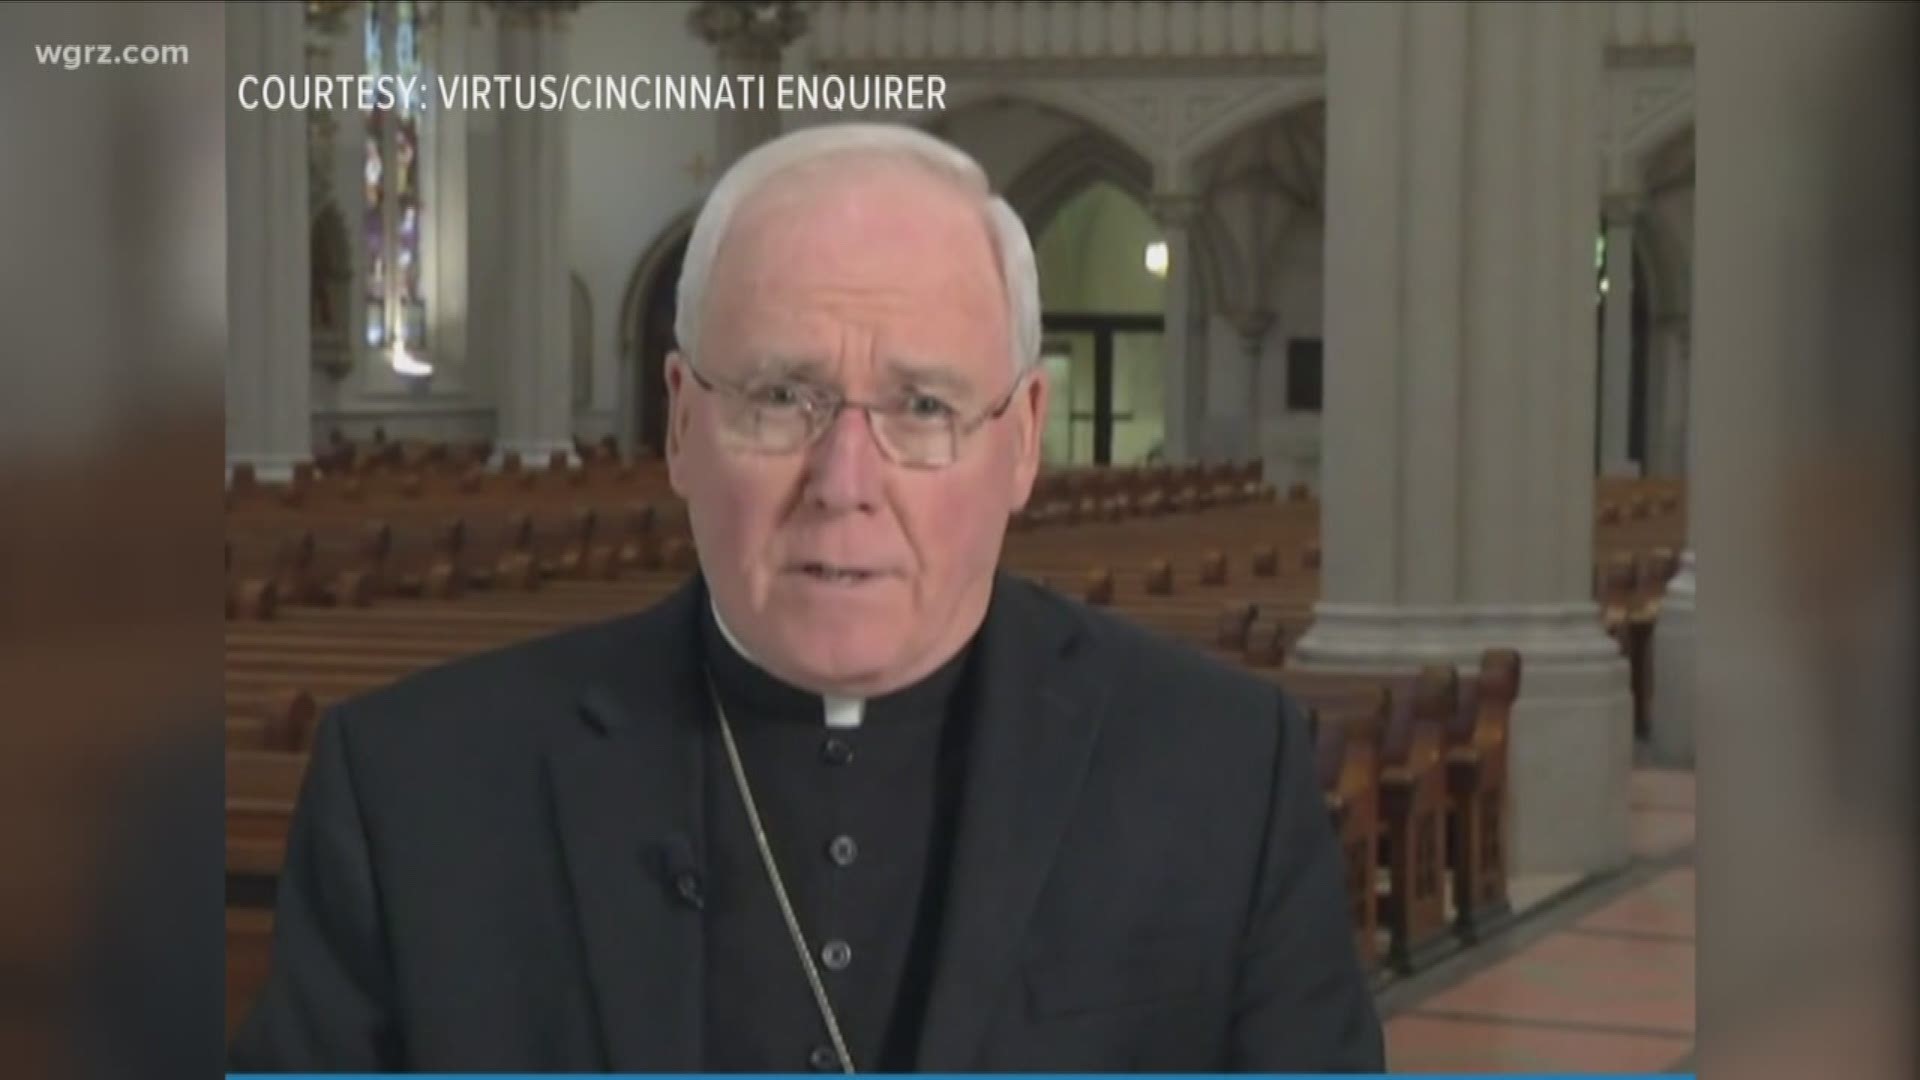 Bishop Malone edited out of training video